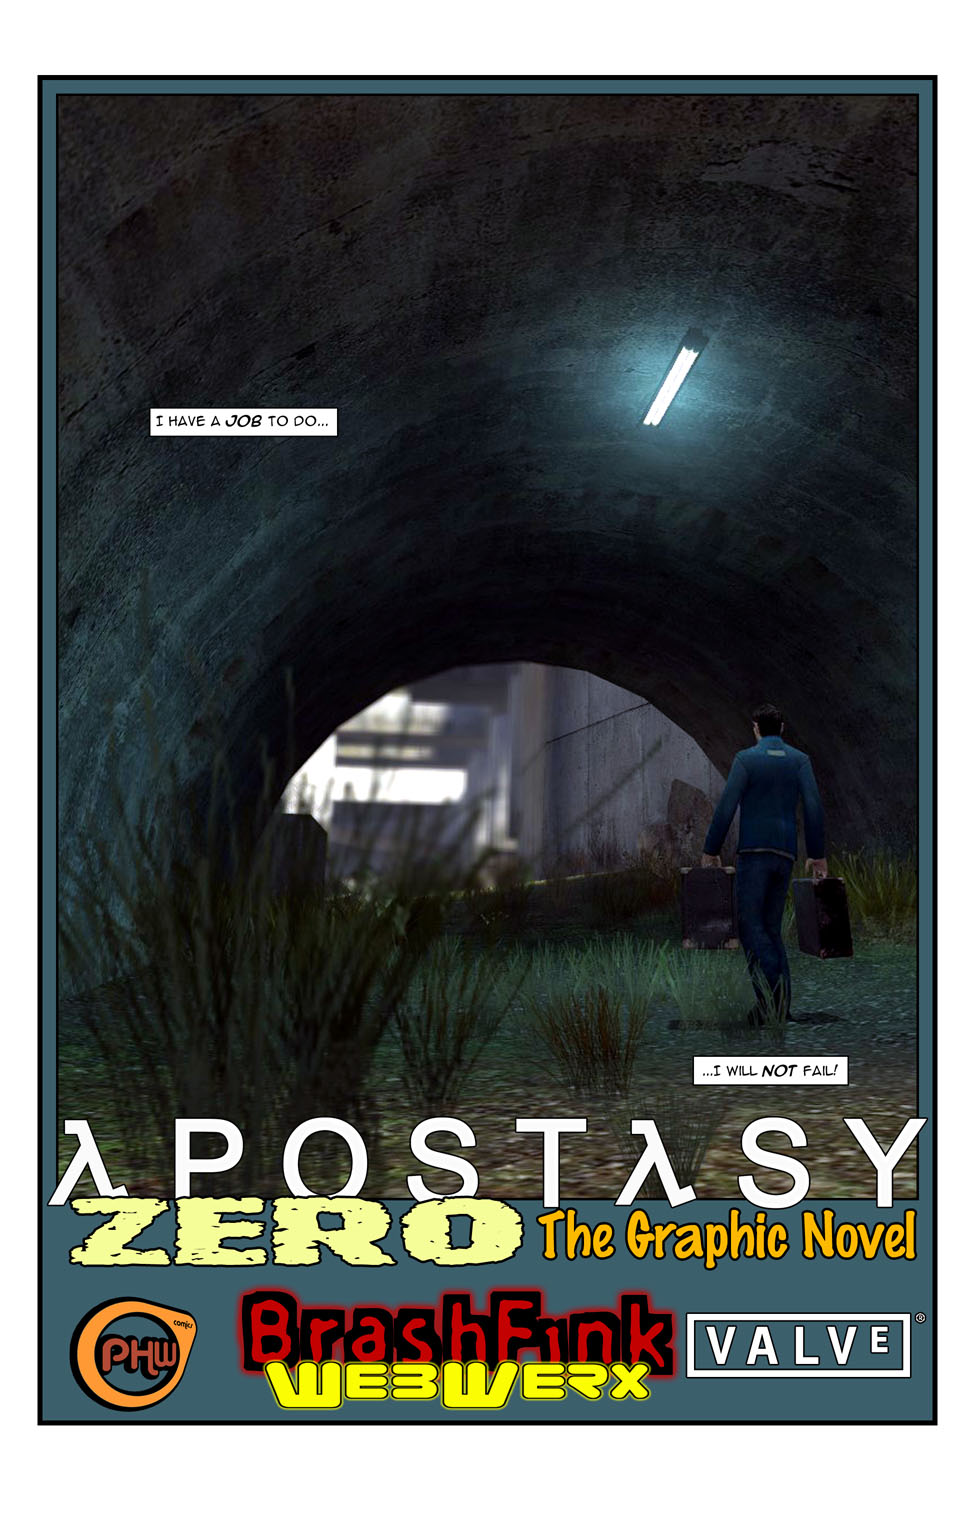 Mikael moves on into the city limits, thinking he has a job to do and will not fail. Introducing the prequel issue, Apostasy zero.